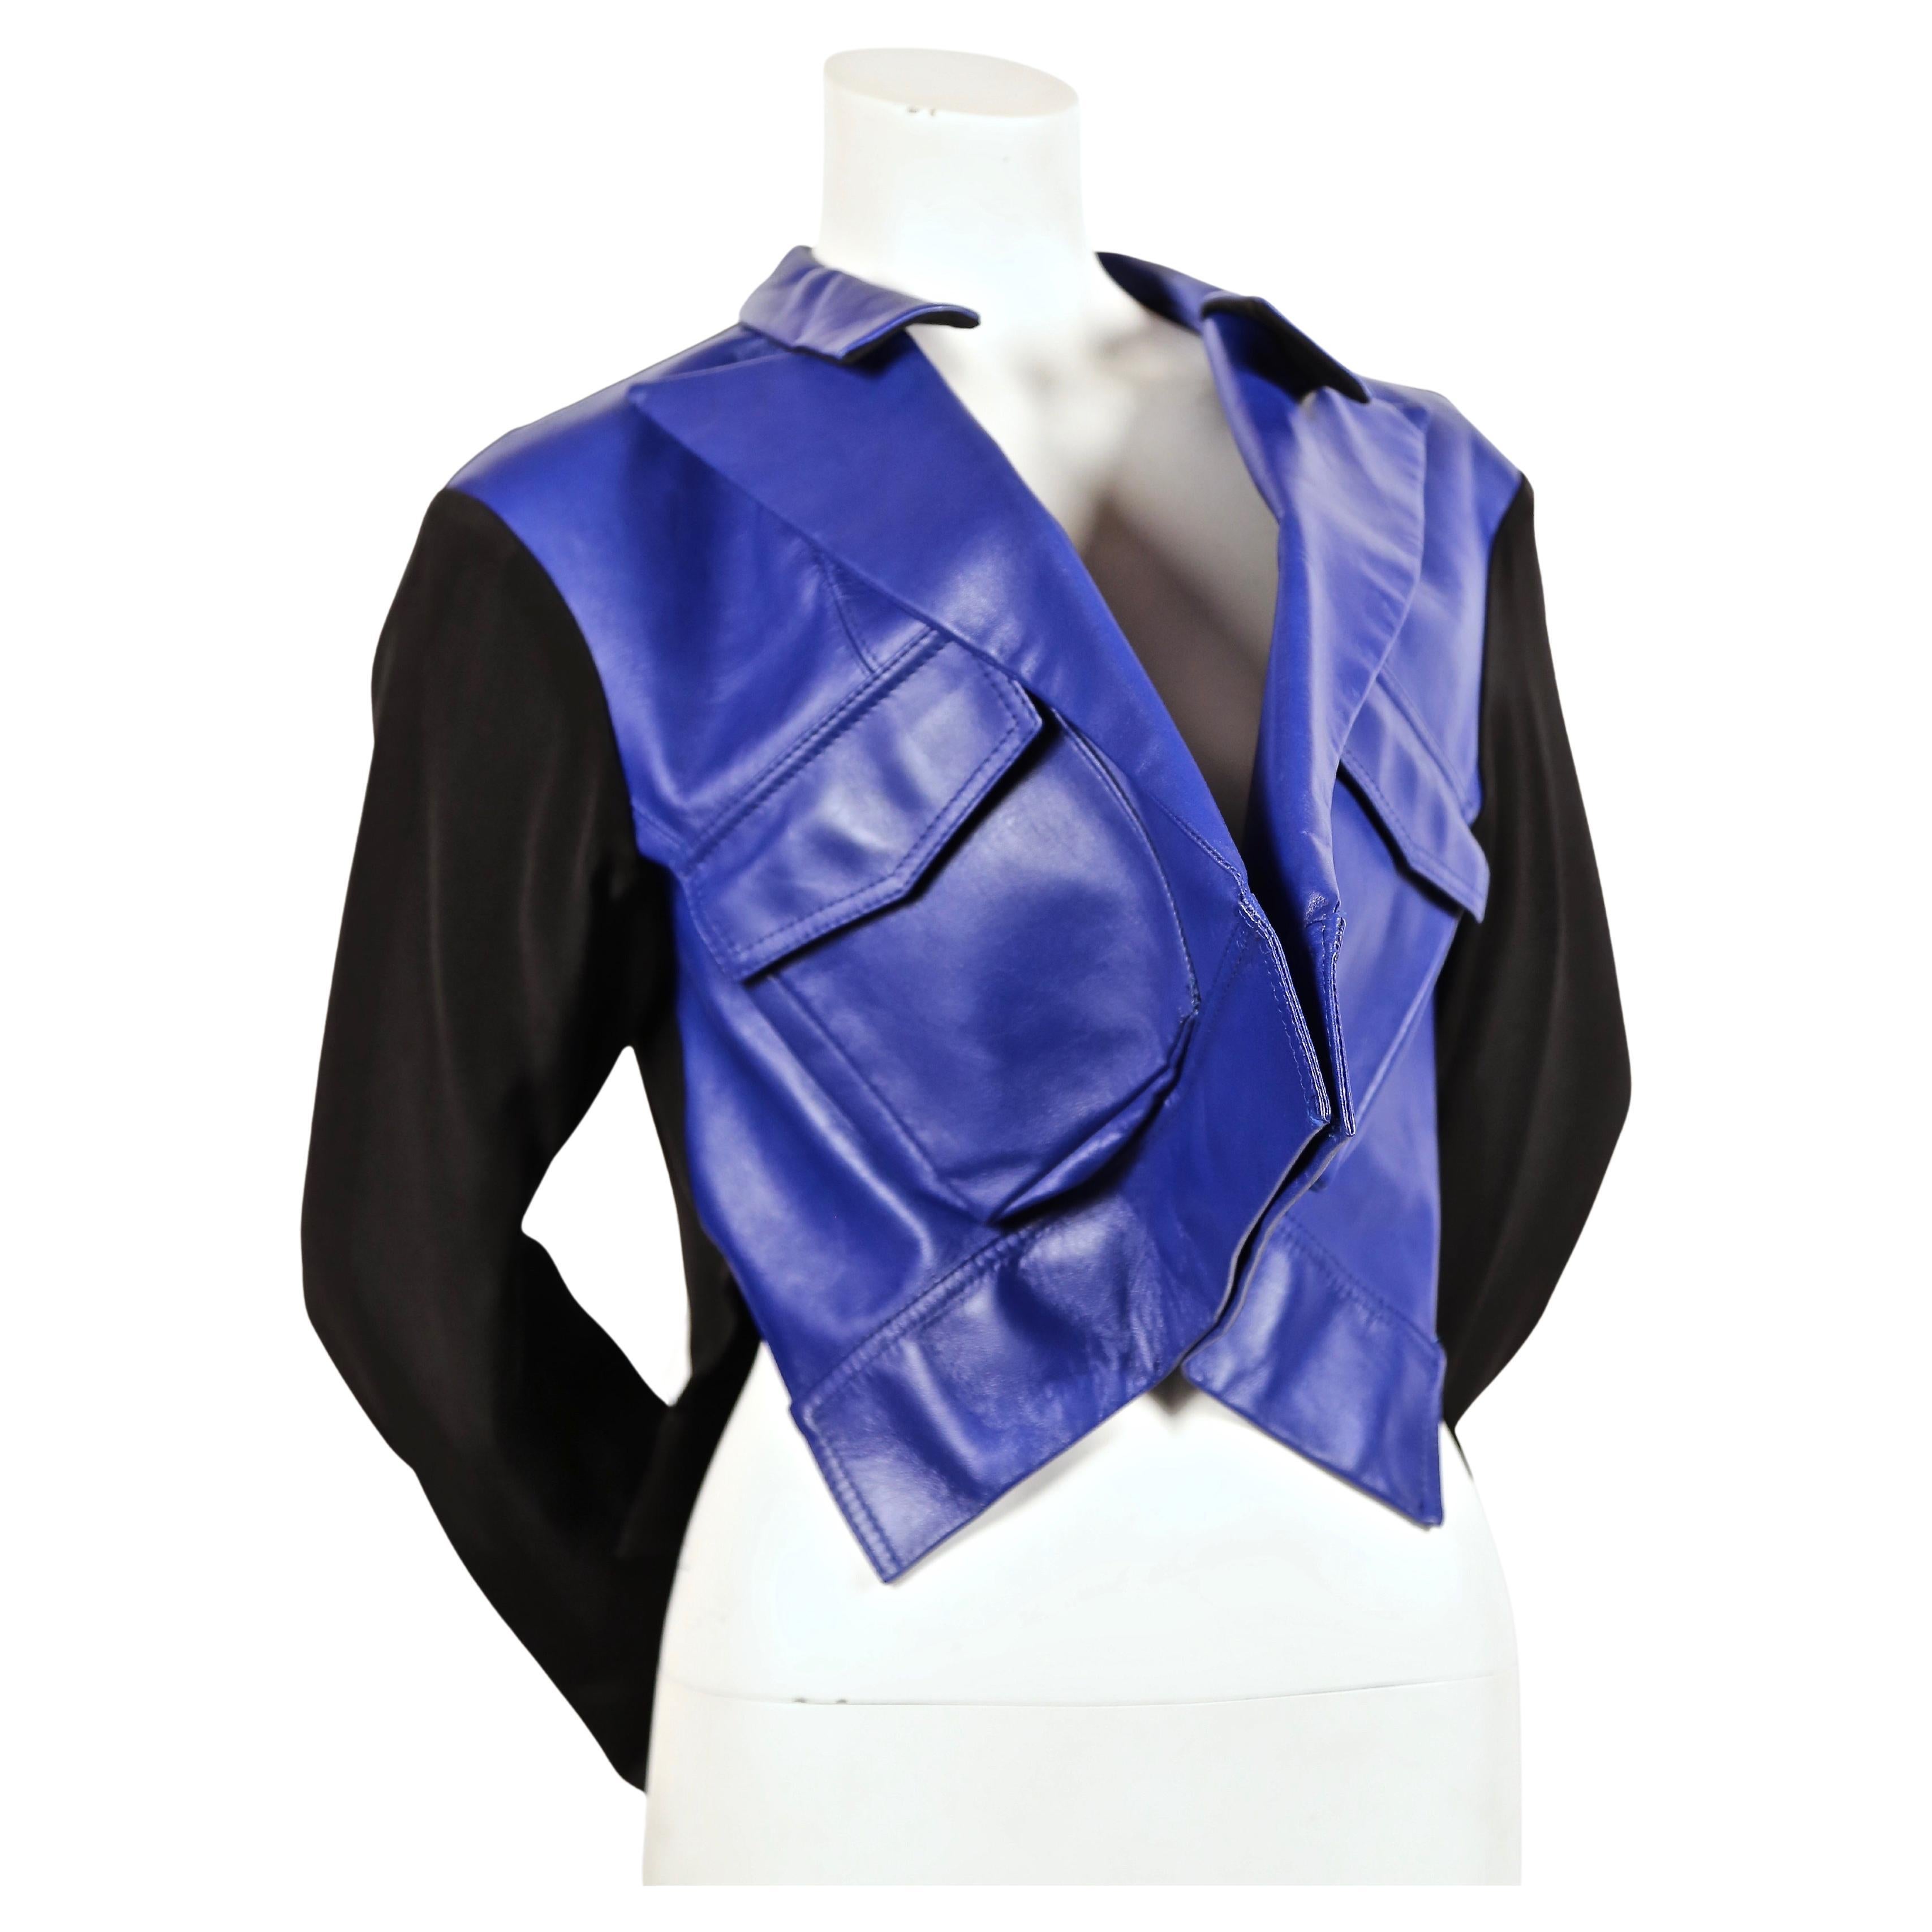 2007 YOHJI YAMAMOTO blue leather runway jacket with forced front - NEW with tags For Sale 2